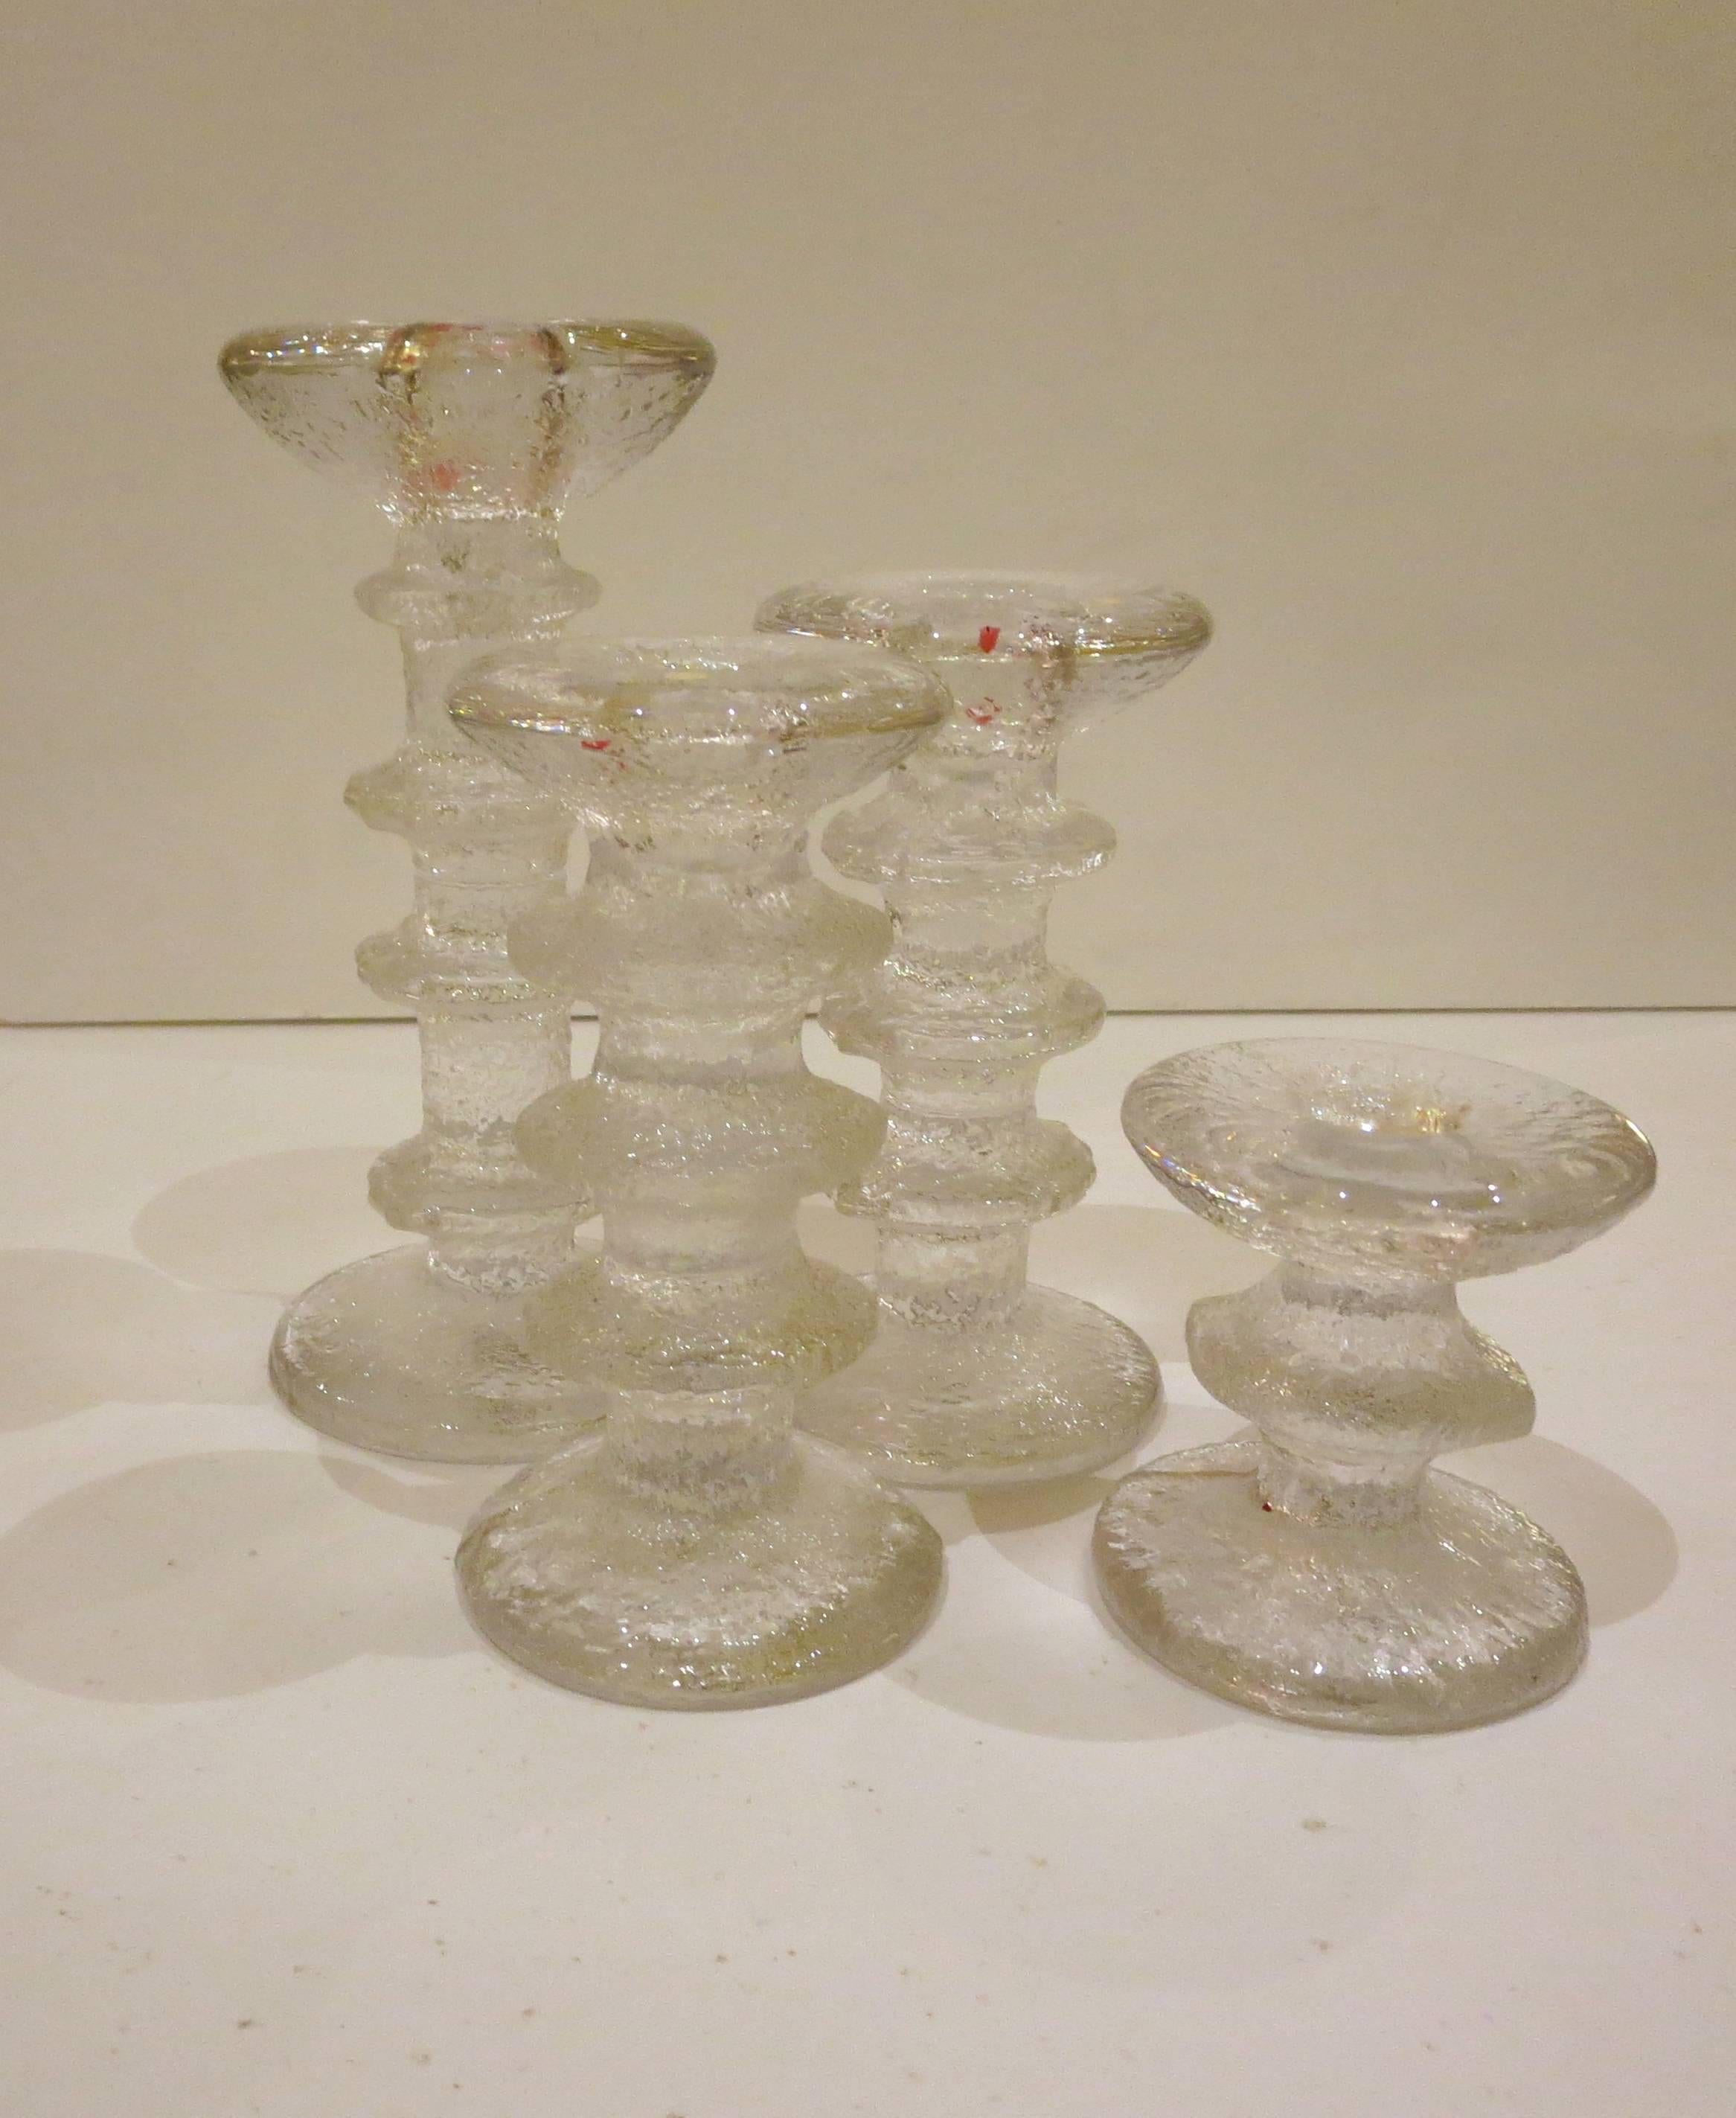 Great set of four textured glass Festivo candleholders, designed by Timo Sarpaneva for Iittala, great condition no chips or cracks, the tallest its 7 1/4